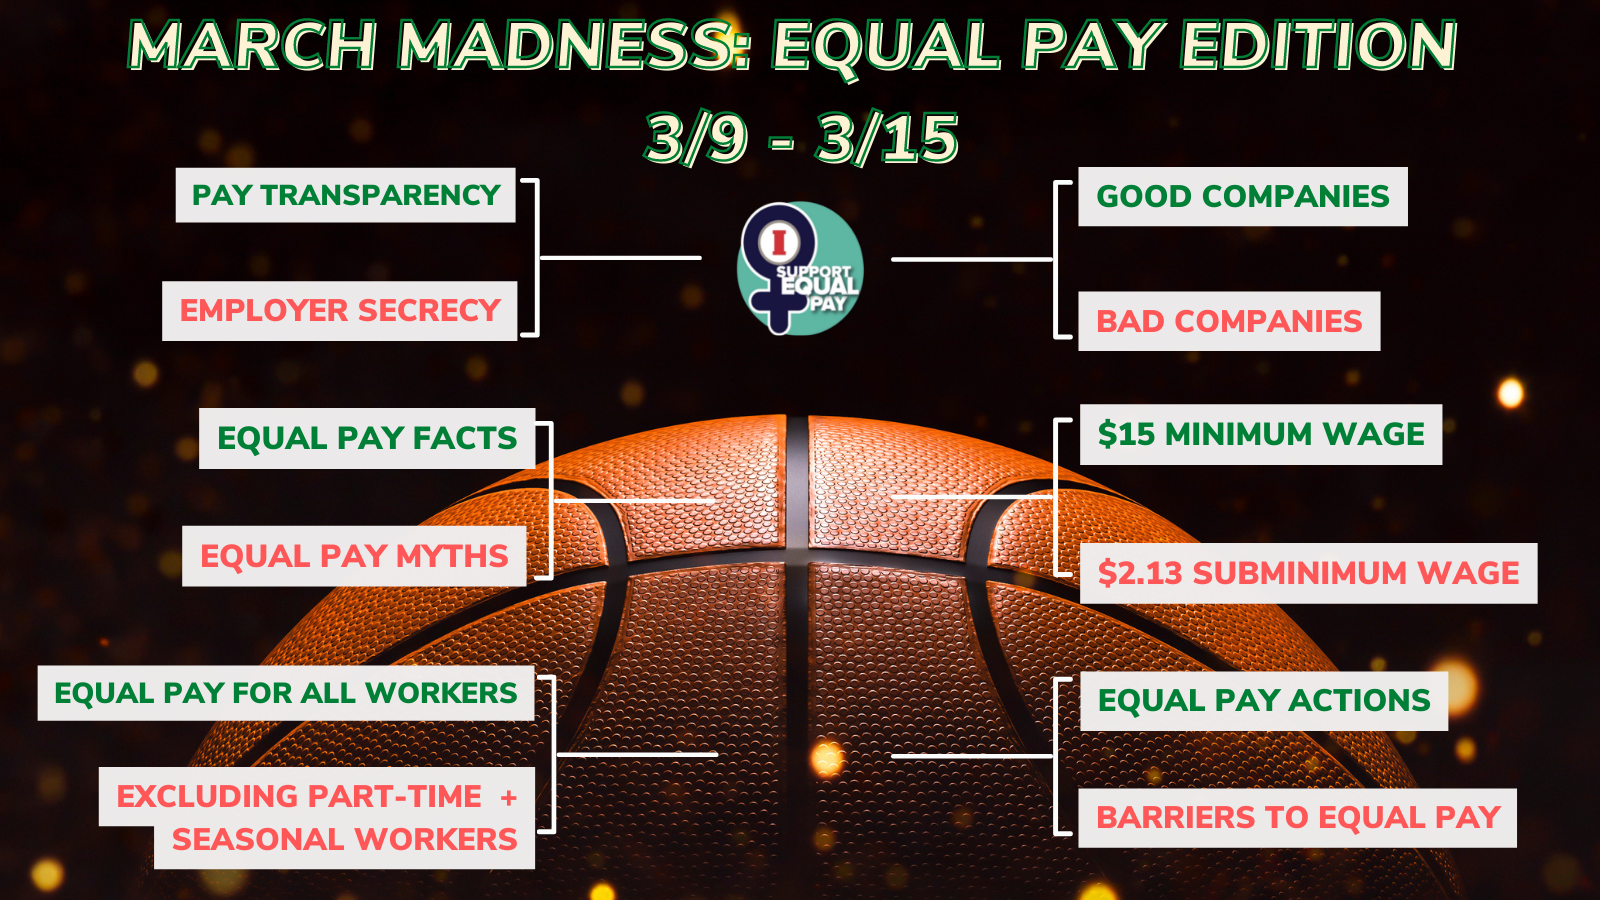 March Madness: Equal Pay edition 3/9-3/15